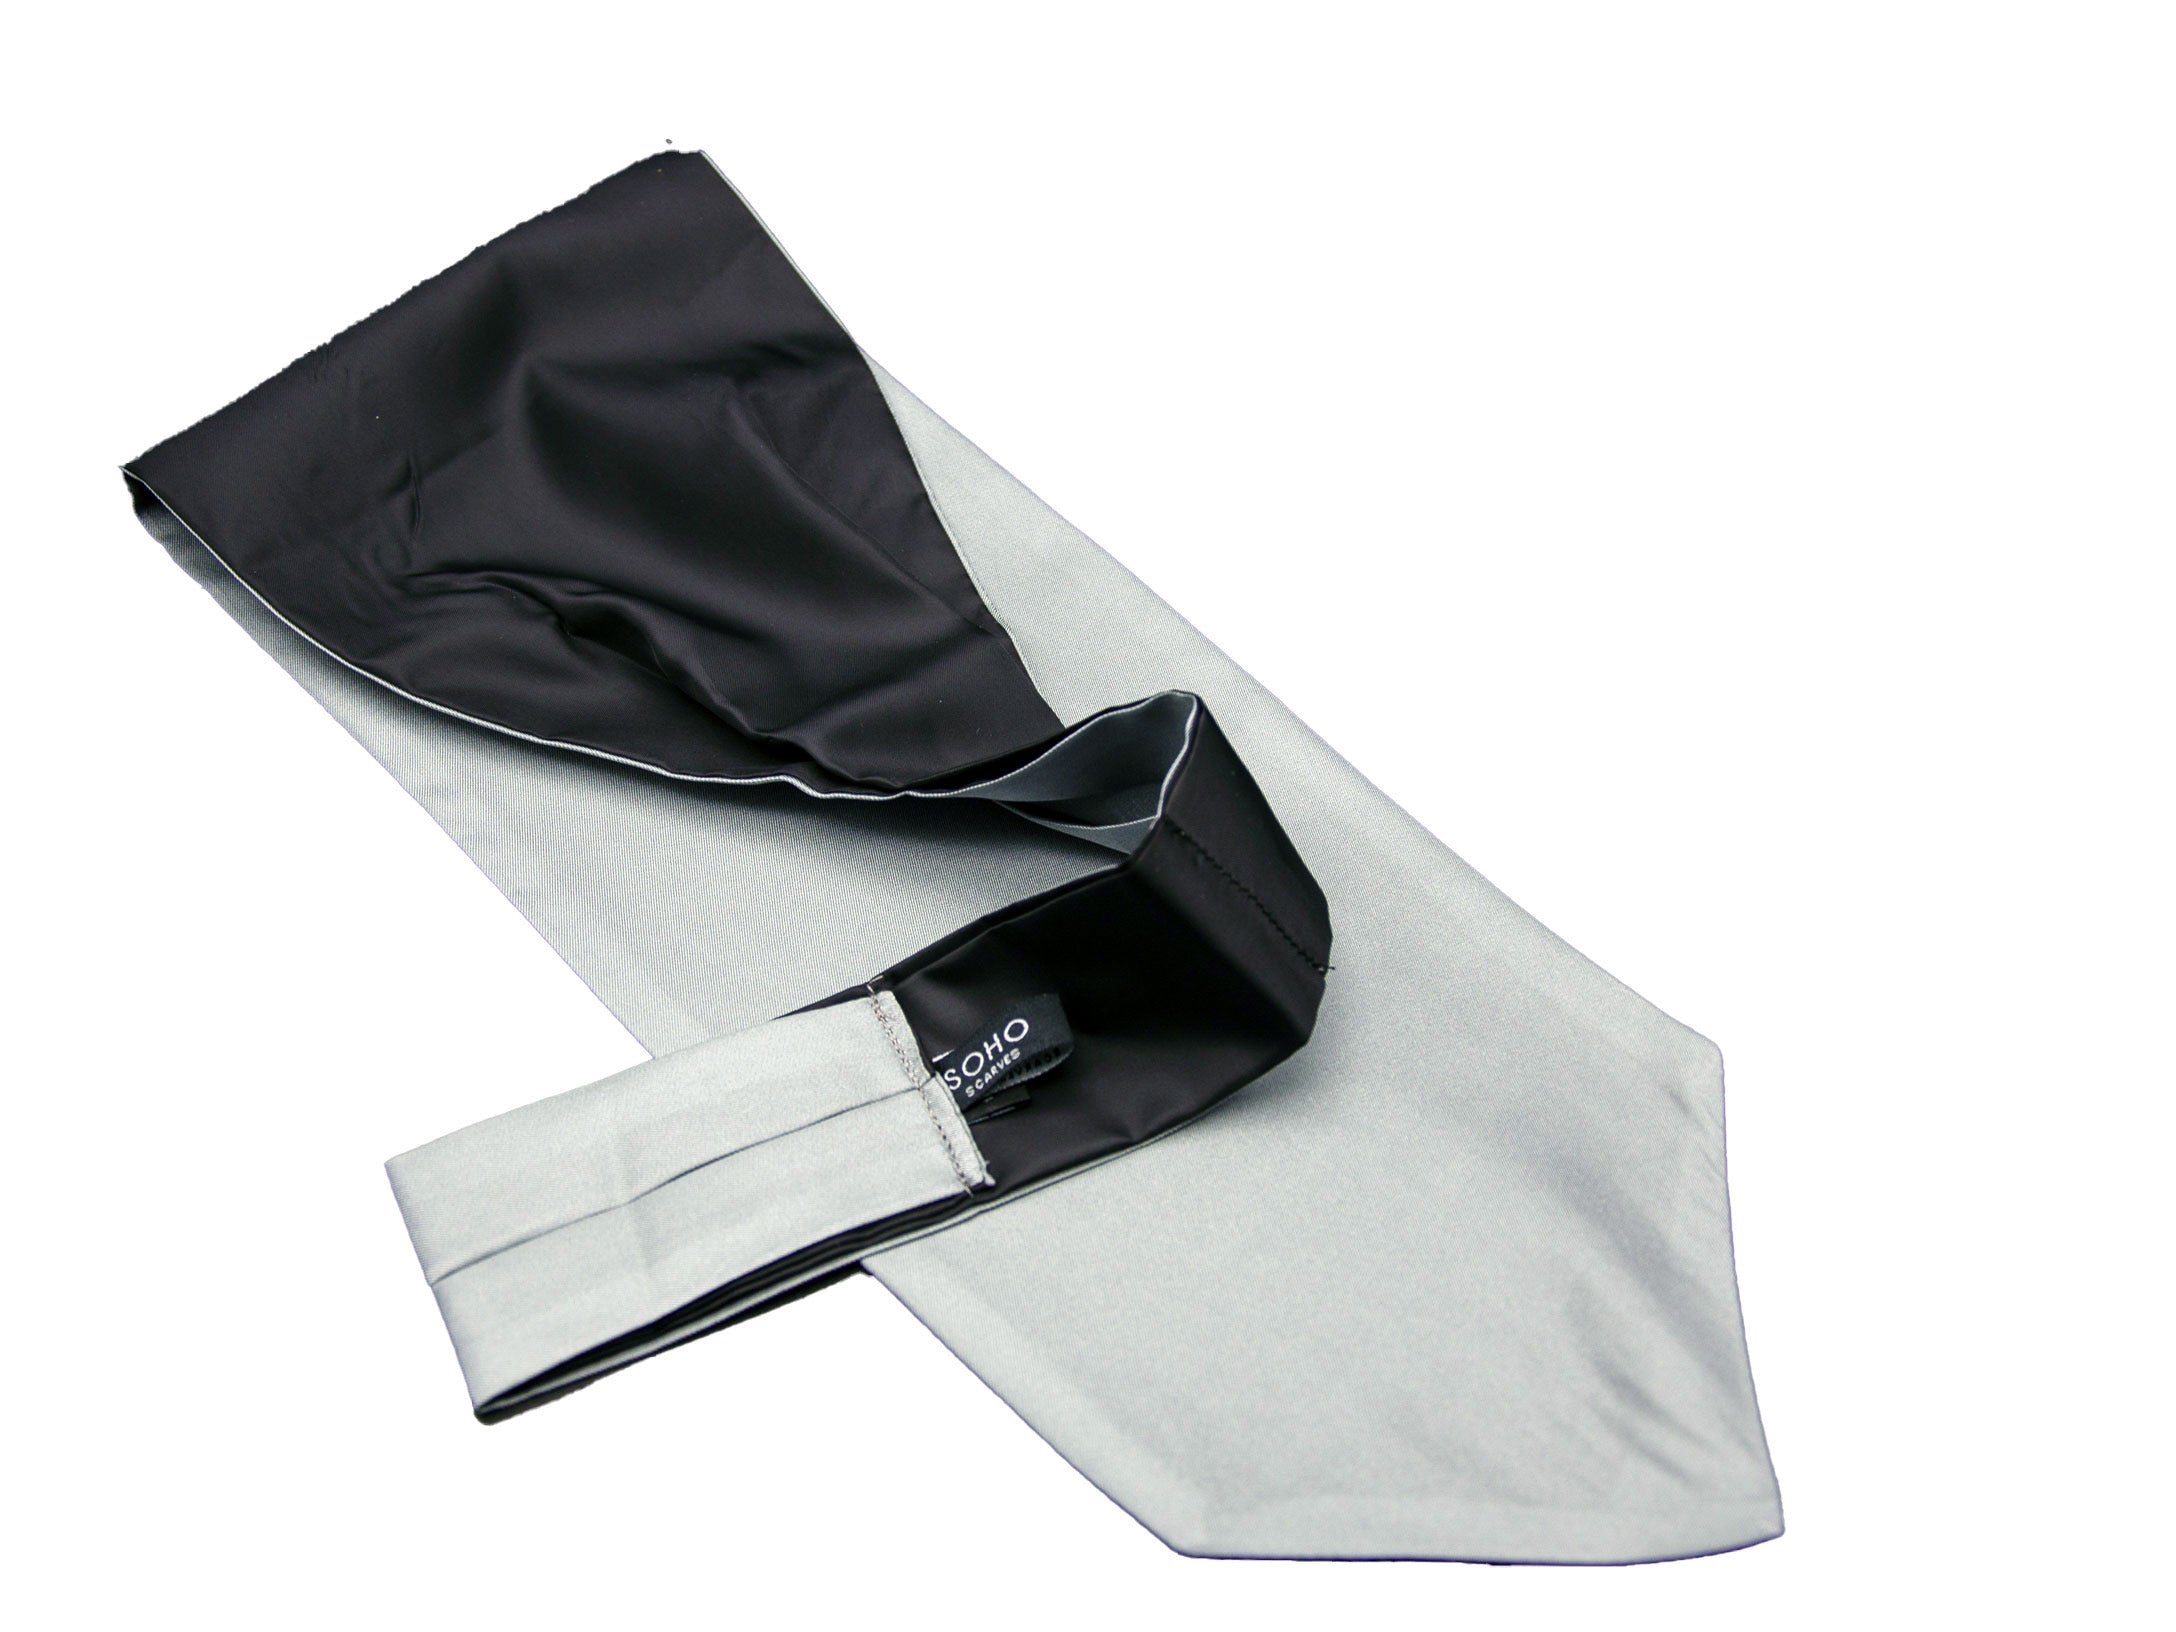 Pale grey 'Bilbao' single pointed Ascot tie arranged diagonally with wide point in foreground. Narrow end of tie folded back and over to reveal dark lining. Placed on white background.